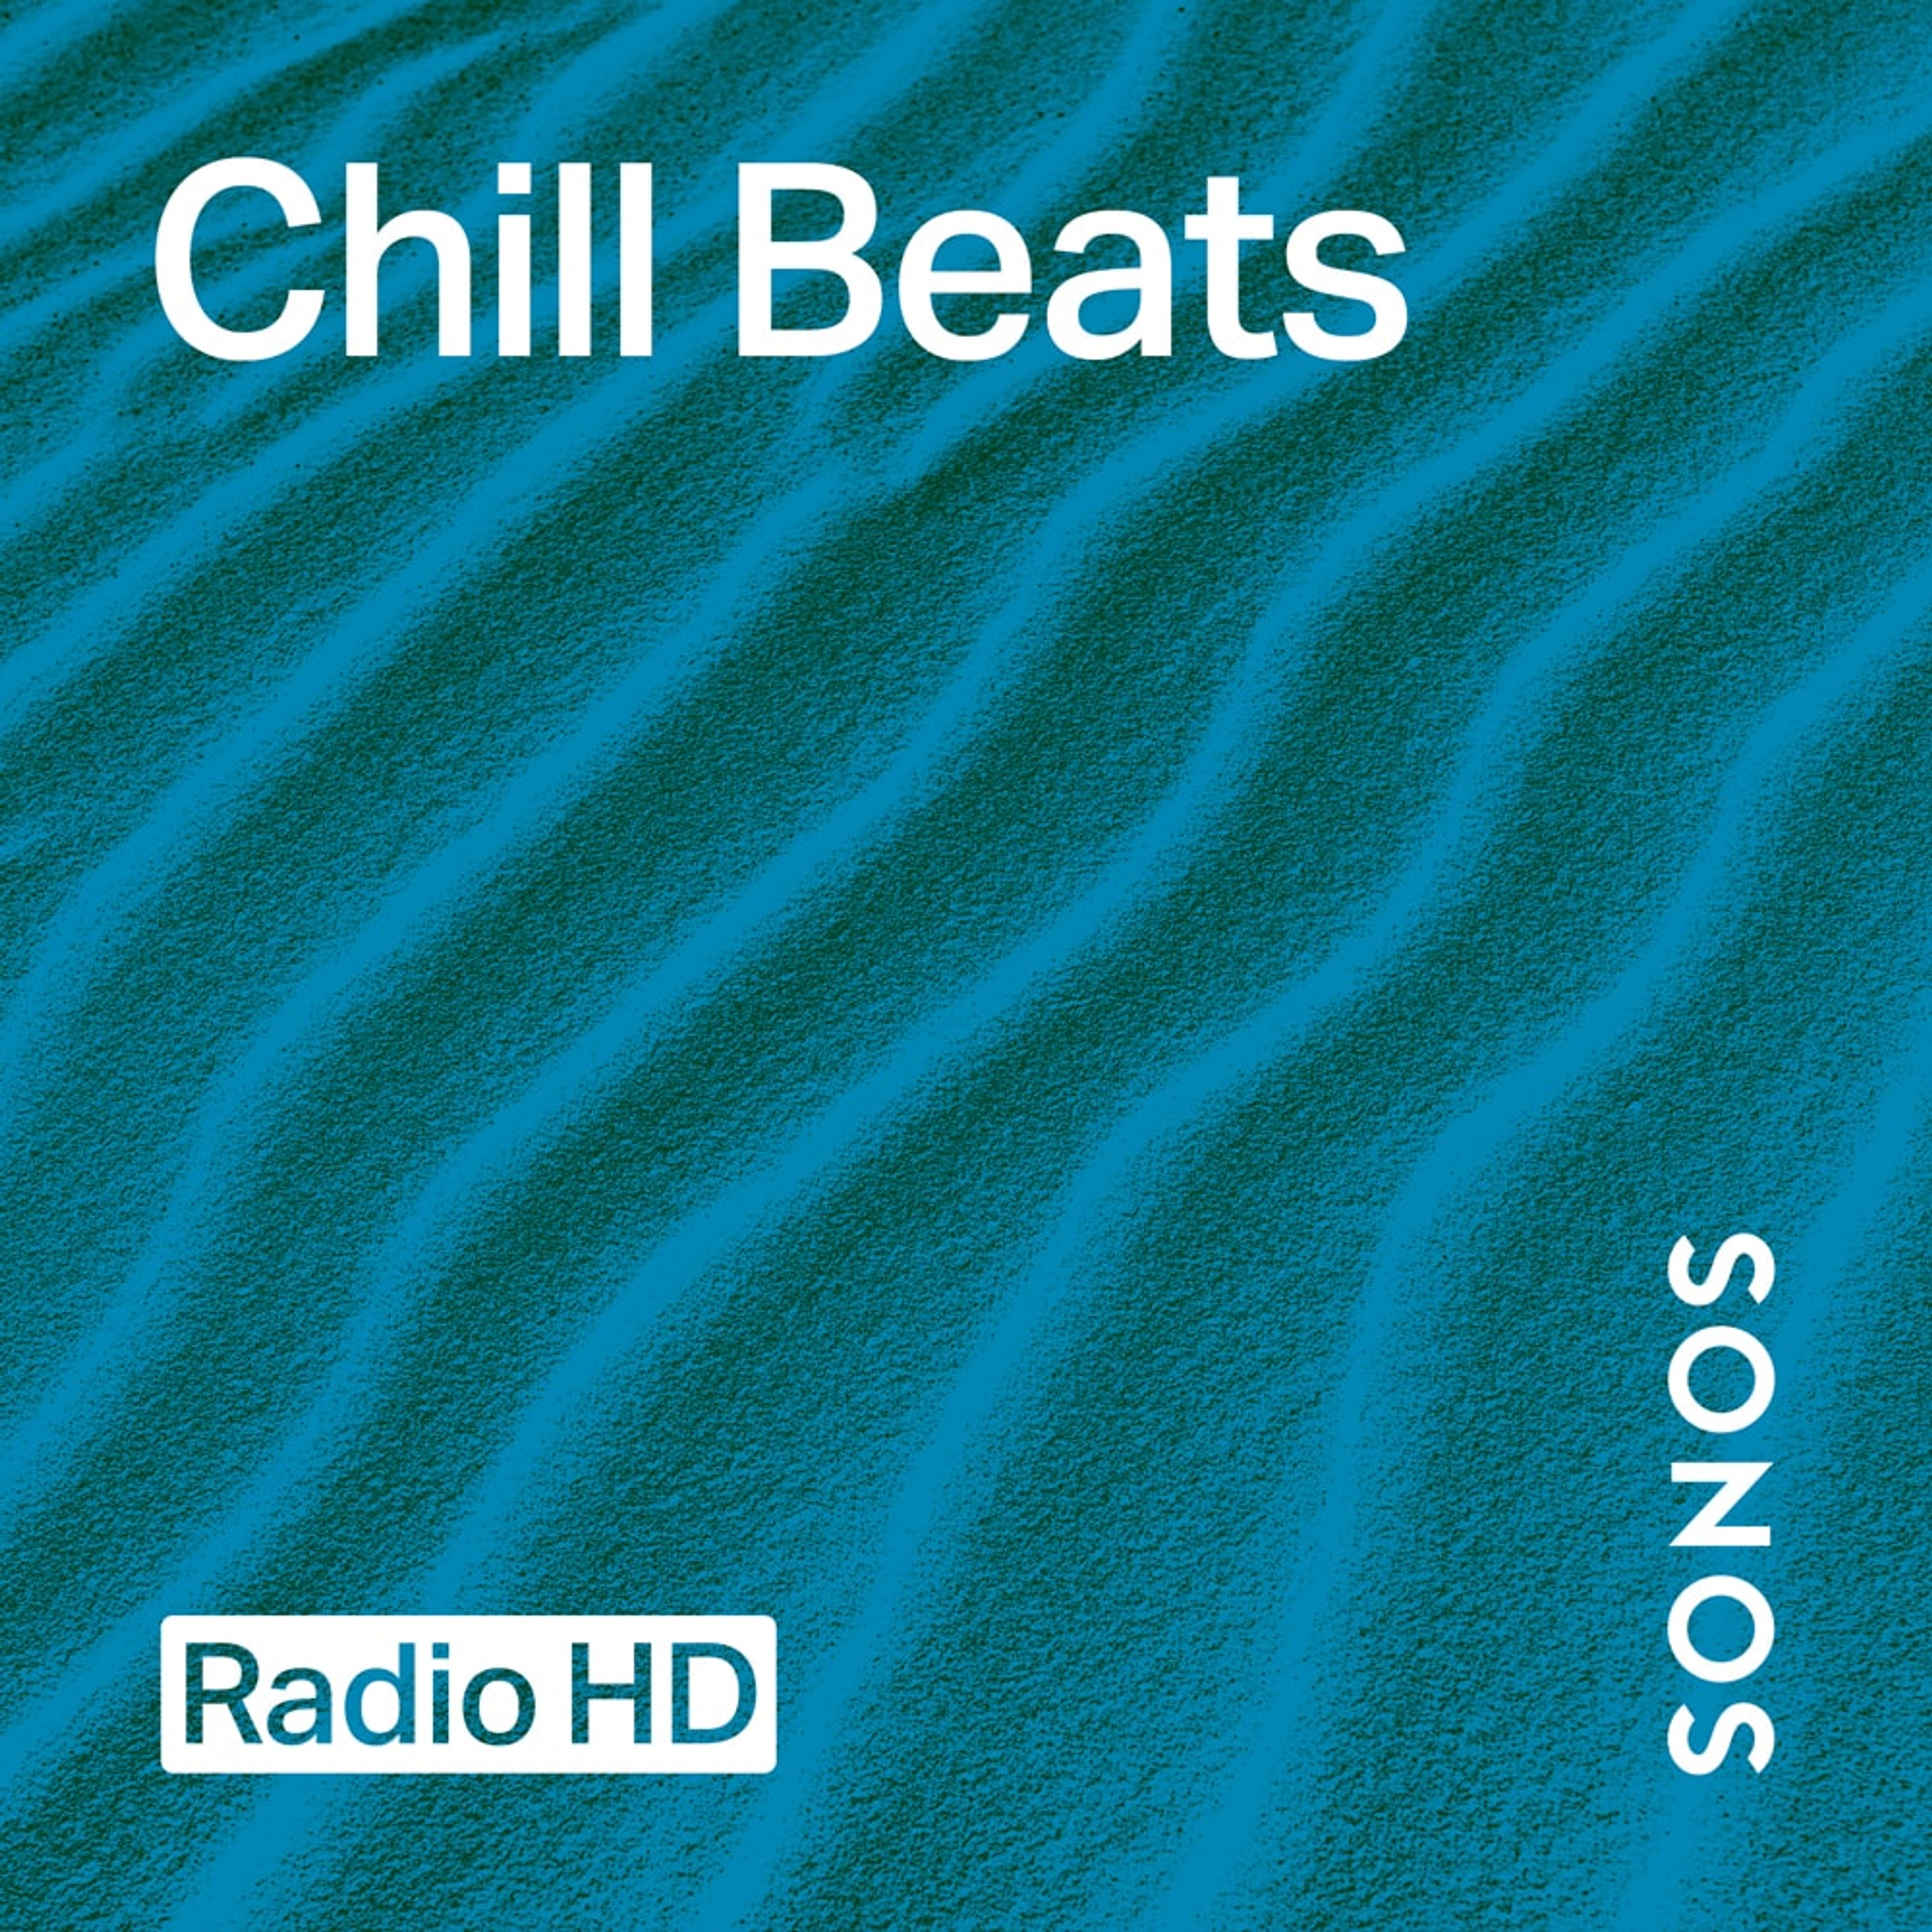 Chill Beats radio station cover